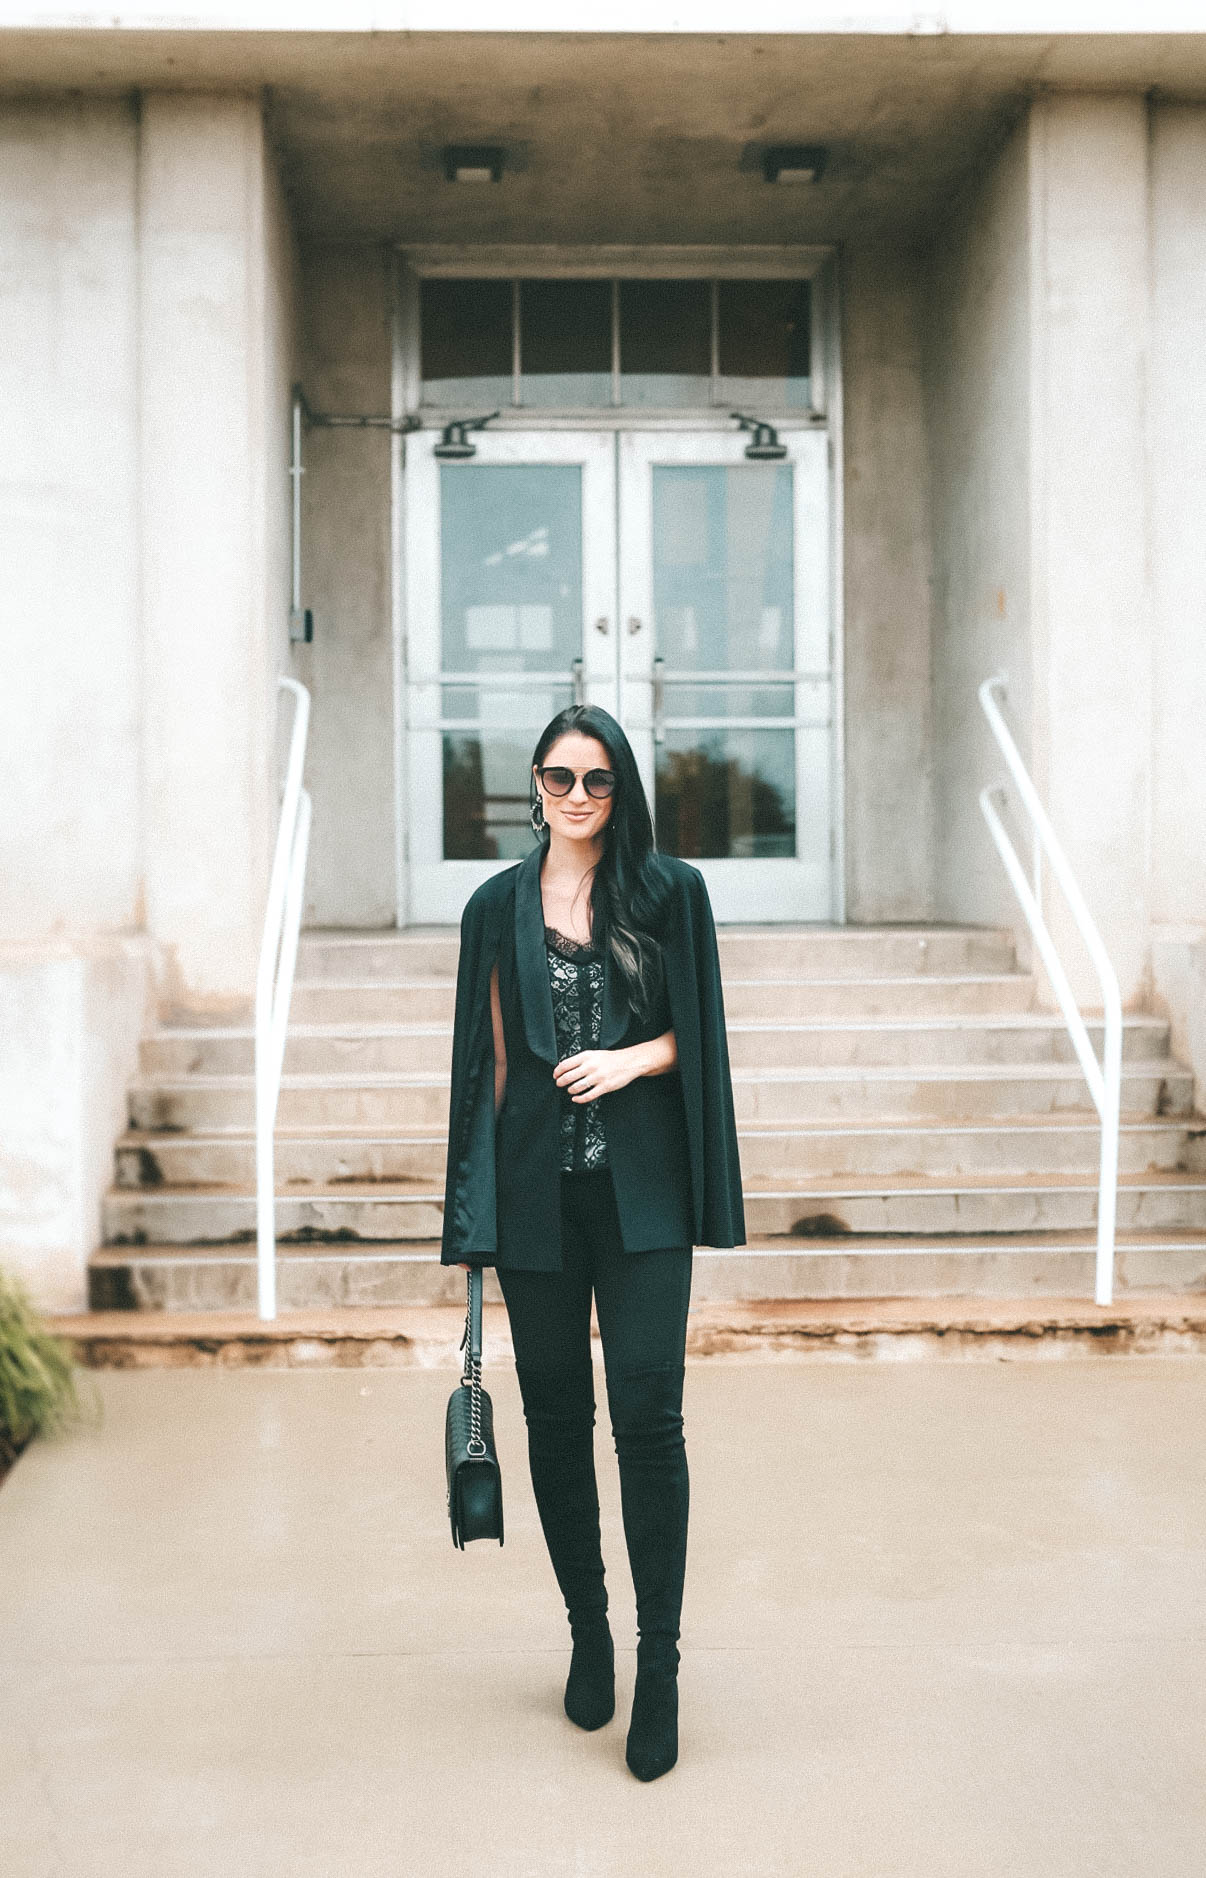 Black tuxedo cape and lace cami || Dressed to Kill #tuxedocape #camisole #lacecami - Shelli Segal Removable Tuxedo Cap by popular Austin style blogger Dressed to Kill